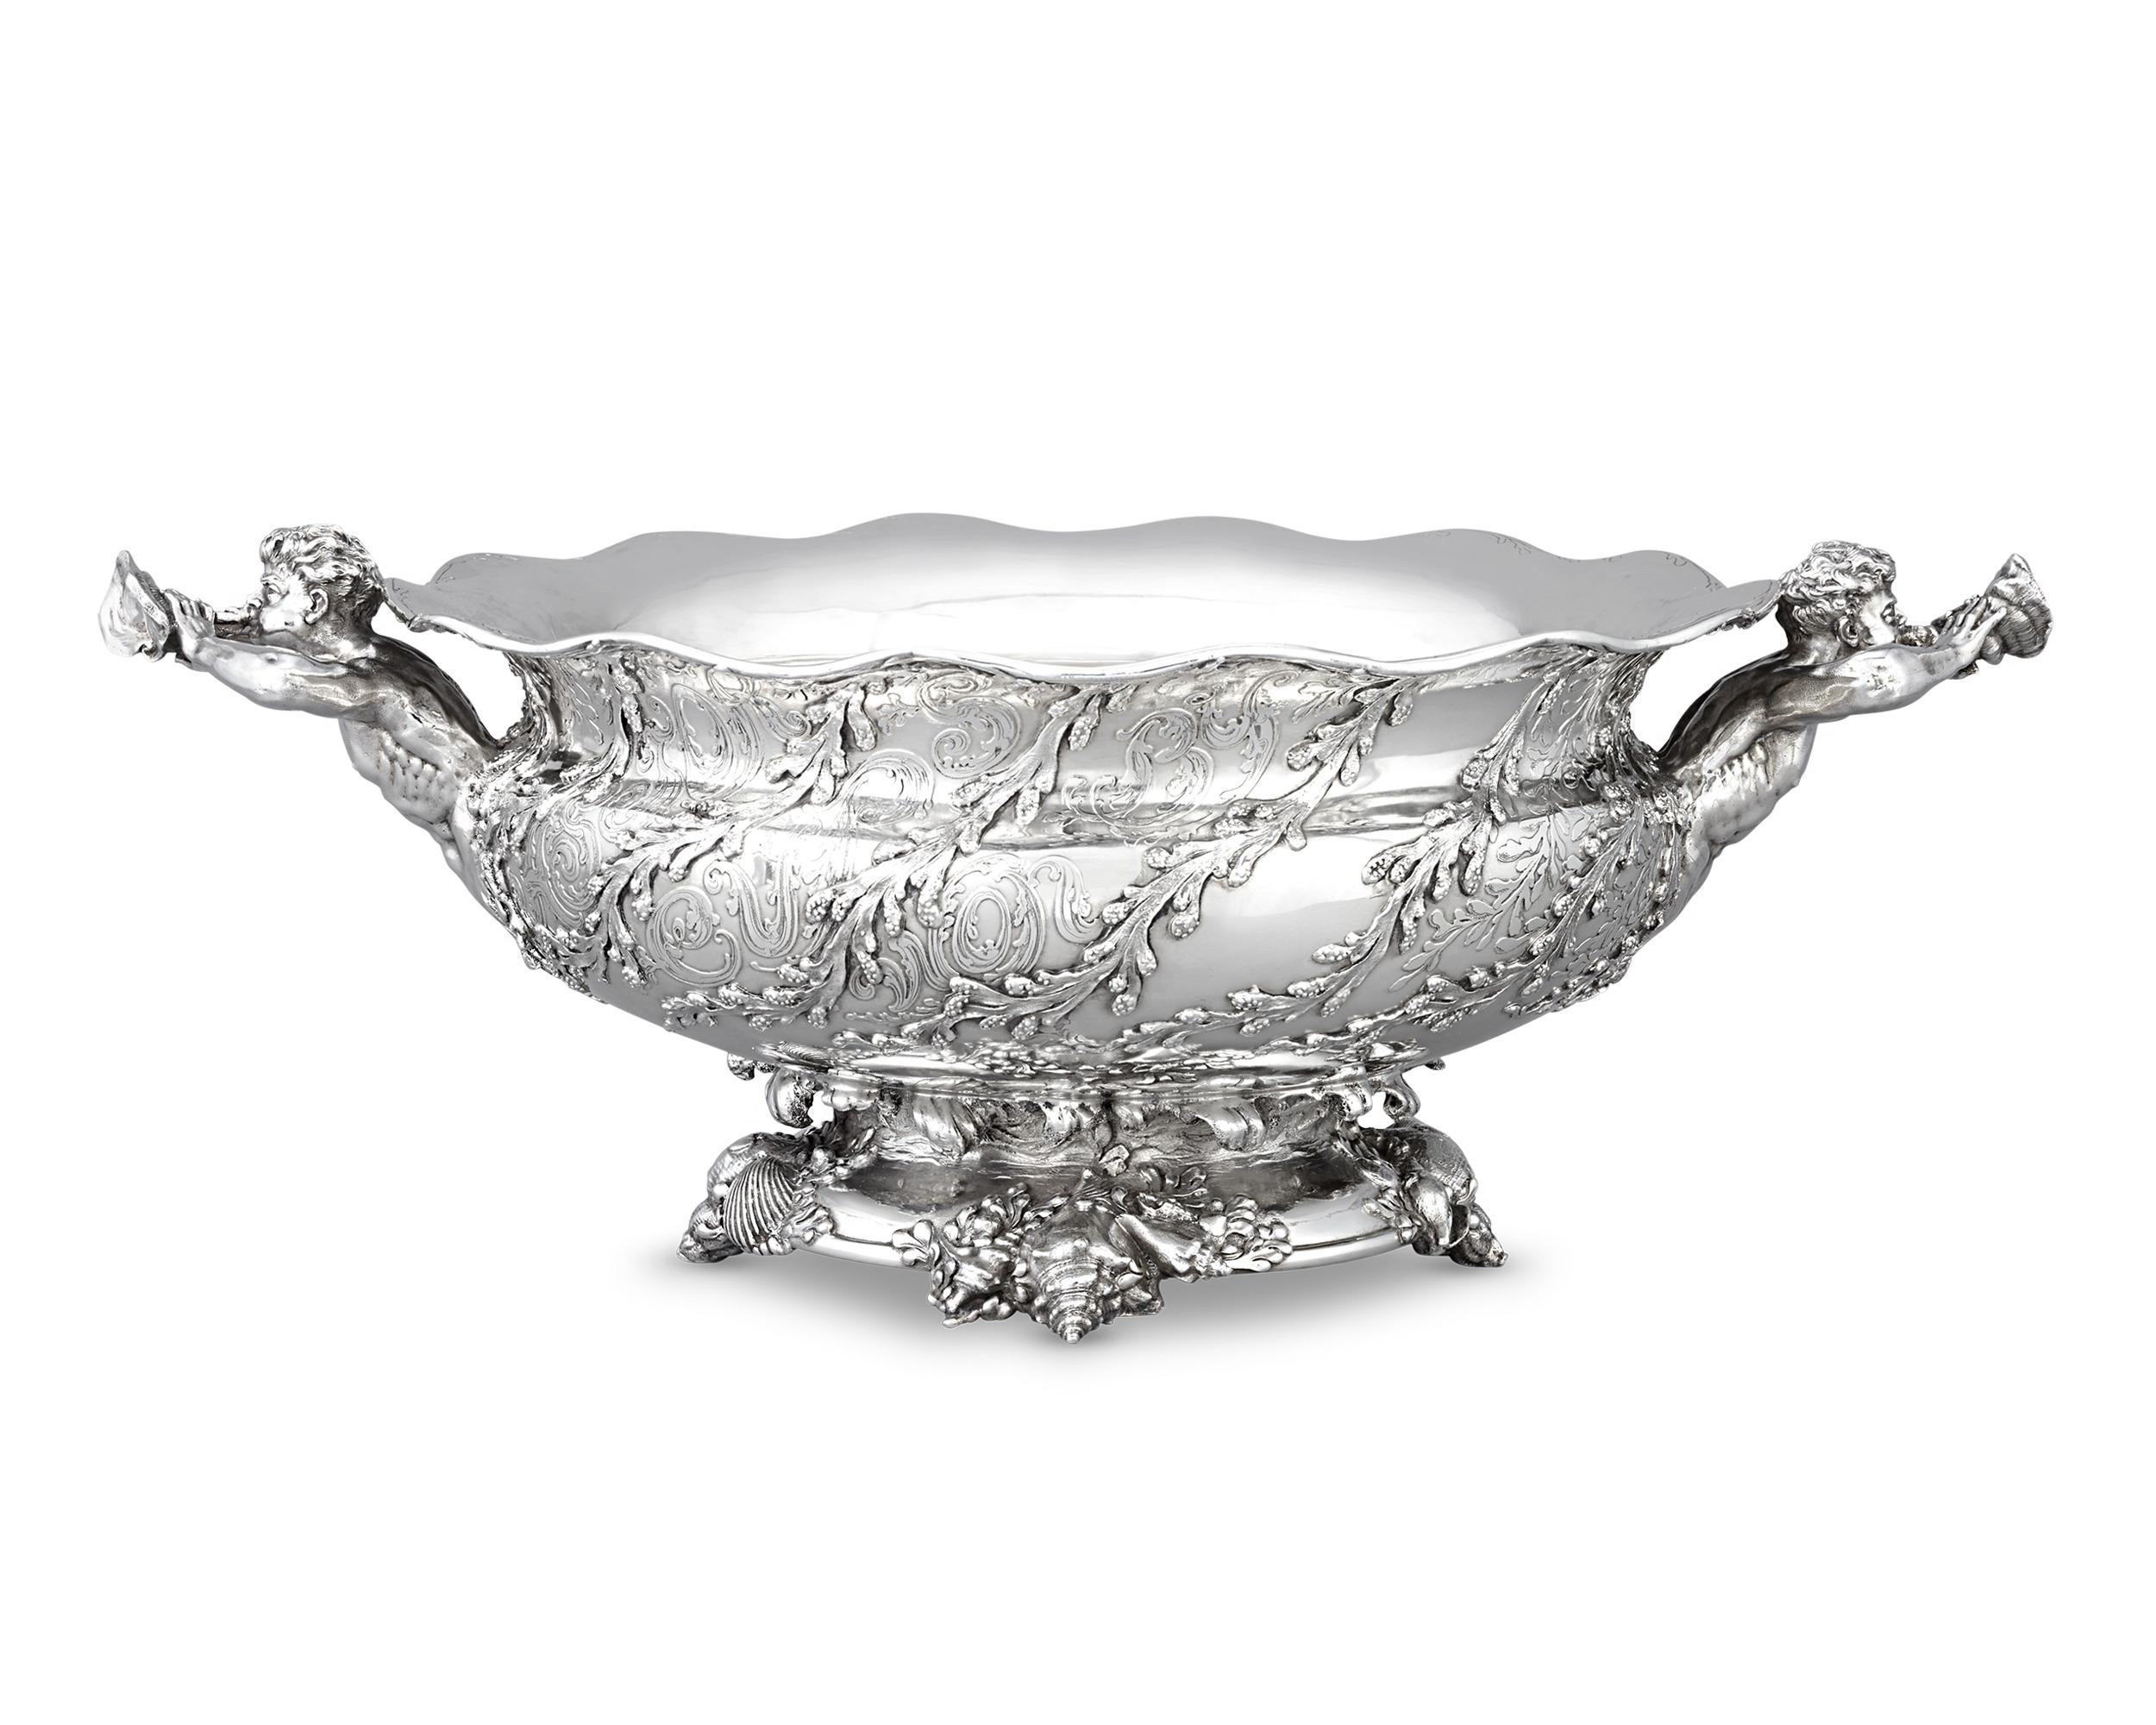 “The Astor Cup is one of yachting’s most treasured trophies, dating back... years and has on its pedestal the most distinguished names in the sport, names that one connotates with wealth and skill.” — New York Times, August 4, 1975.

This